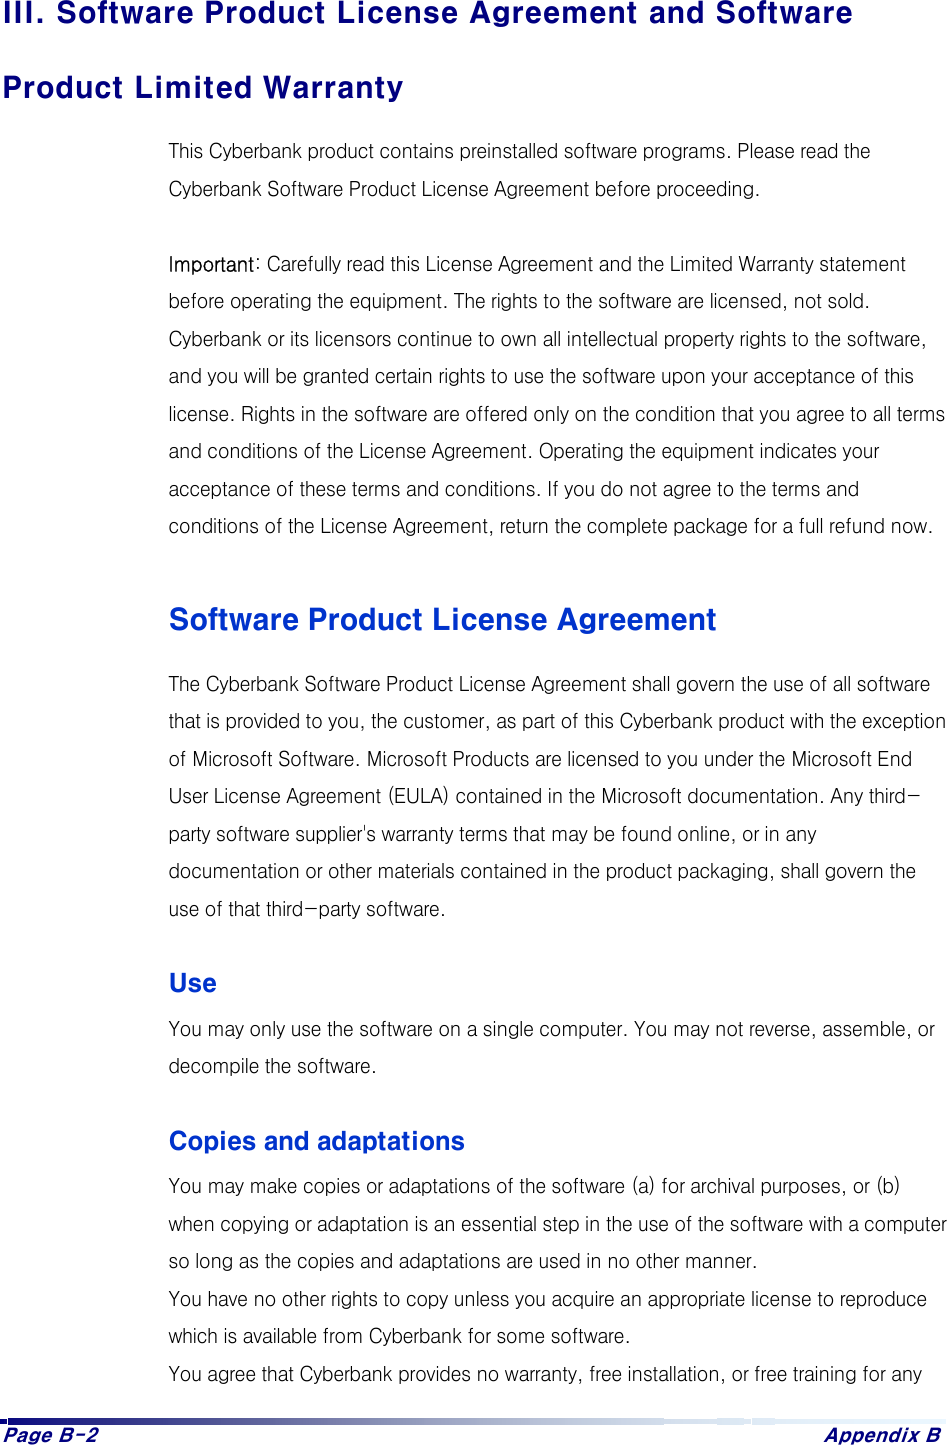 Page B-2  Appendix B III. Software Product License Agreement and Software Product Limited Warranty This Cyberbank product contains preinstalled software programs. Please read the Cyberbank Software Product License Agreement before proceeding.  Important: Carefully read this License Agreement and the Limited Warranty statement before operating the equipment. The rights to the software are licensed, not sold. Cyberbank or its licensors continue to own all intellectual property rights to the software, and you will be granted certain rights to use the software upon your acceptance of this license. Rights in the software are offered only on the condition that you agree to all terms and conditions of the License Agreement. Operating the equipment indicates your acceptance of these terms and conditions. If you do not agree to the terms and conditions of the License Agreement, return the complete package for a full refund now.  Software Product License Agreement The Cyberbank Software Product License Agreement shall govern the use of all software that is provided to you, the customer, as part of this Cyberbank product with the exception of Microsoft Software. Microsoft Products are licensed to you under the Microsoft End User License Agreement (EULA) contained in the Microsoft documentation. Any third-party software supplier&apos;s warranty terms that may be found online, or in any documentation or other materials contained in the product packaging, shall govern the use of that third-party software.  Use You may only use the software on a single computer. You may not reverse, assemble, or decompile the software.  Copies and adaptations You may make copies or adaptations of the software (a) for archival purposes, or (b) when copying or adaptation is an essential step in the use of the software with a computer so long as the copies and adaptations are used in no other manner. You have no other rights to copy unless you acquire an appropriate license to reproduce which is available from Cyberbank for some software. You agree that Cyberbank provides no warranty, free installation, or free training for any 